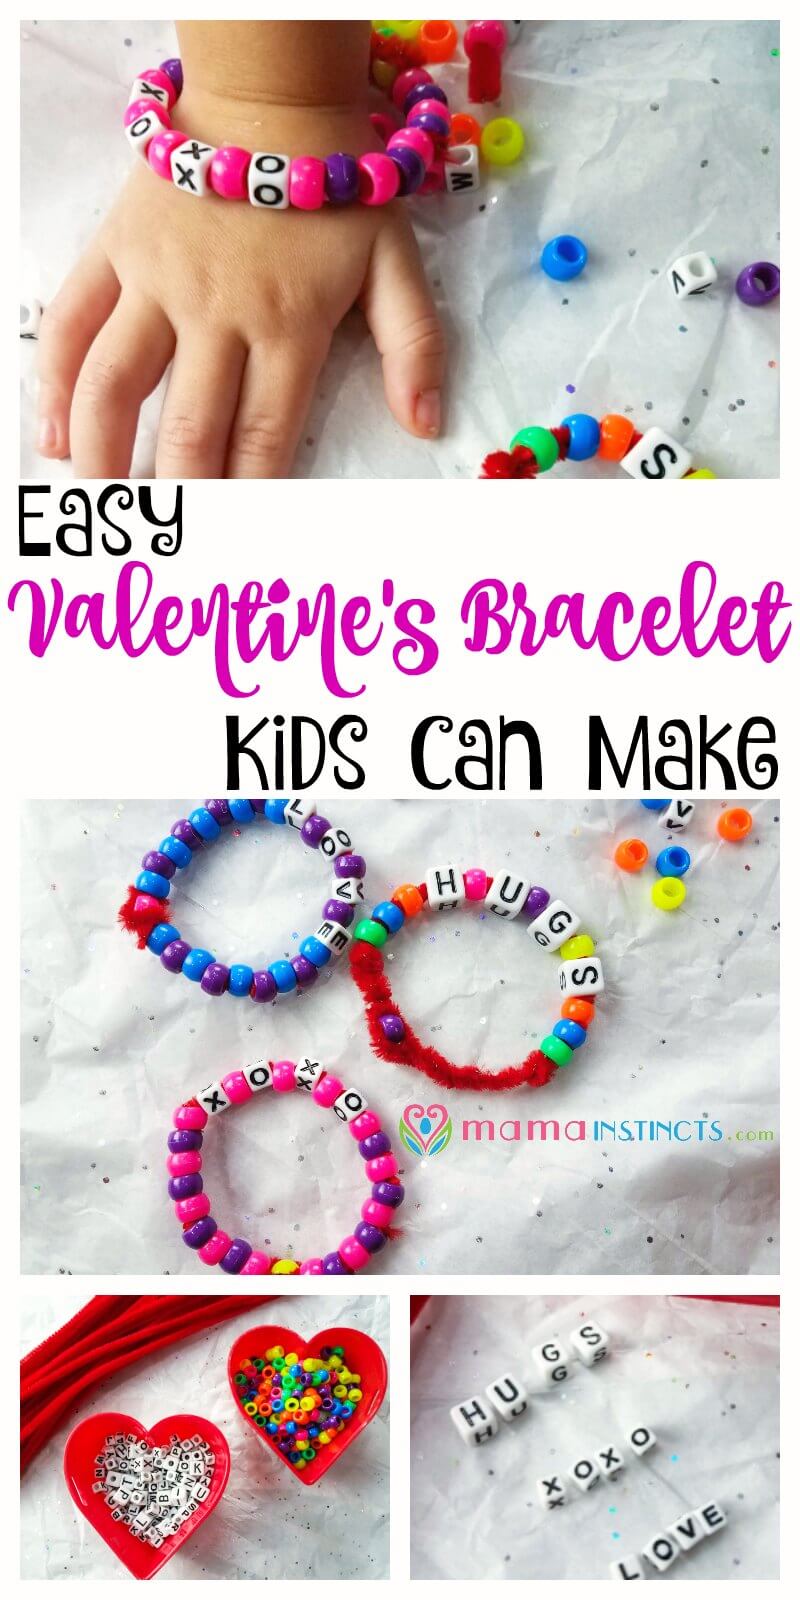 Try this easy and fun activity for Valentine's day. It's a great way to practice fine motor skills and letter recognition for kids 3 and older. If you're child is younger they will love this activity too but they will need adult supervision since the beads are a choking hazard.